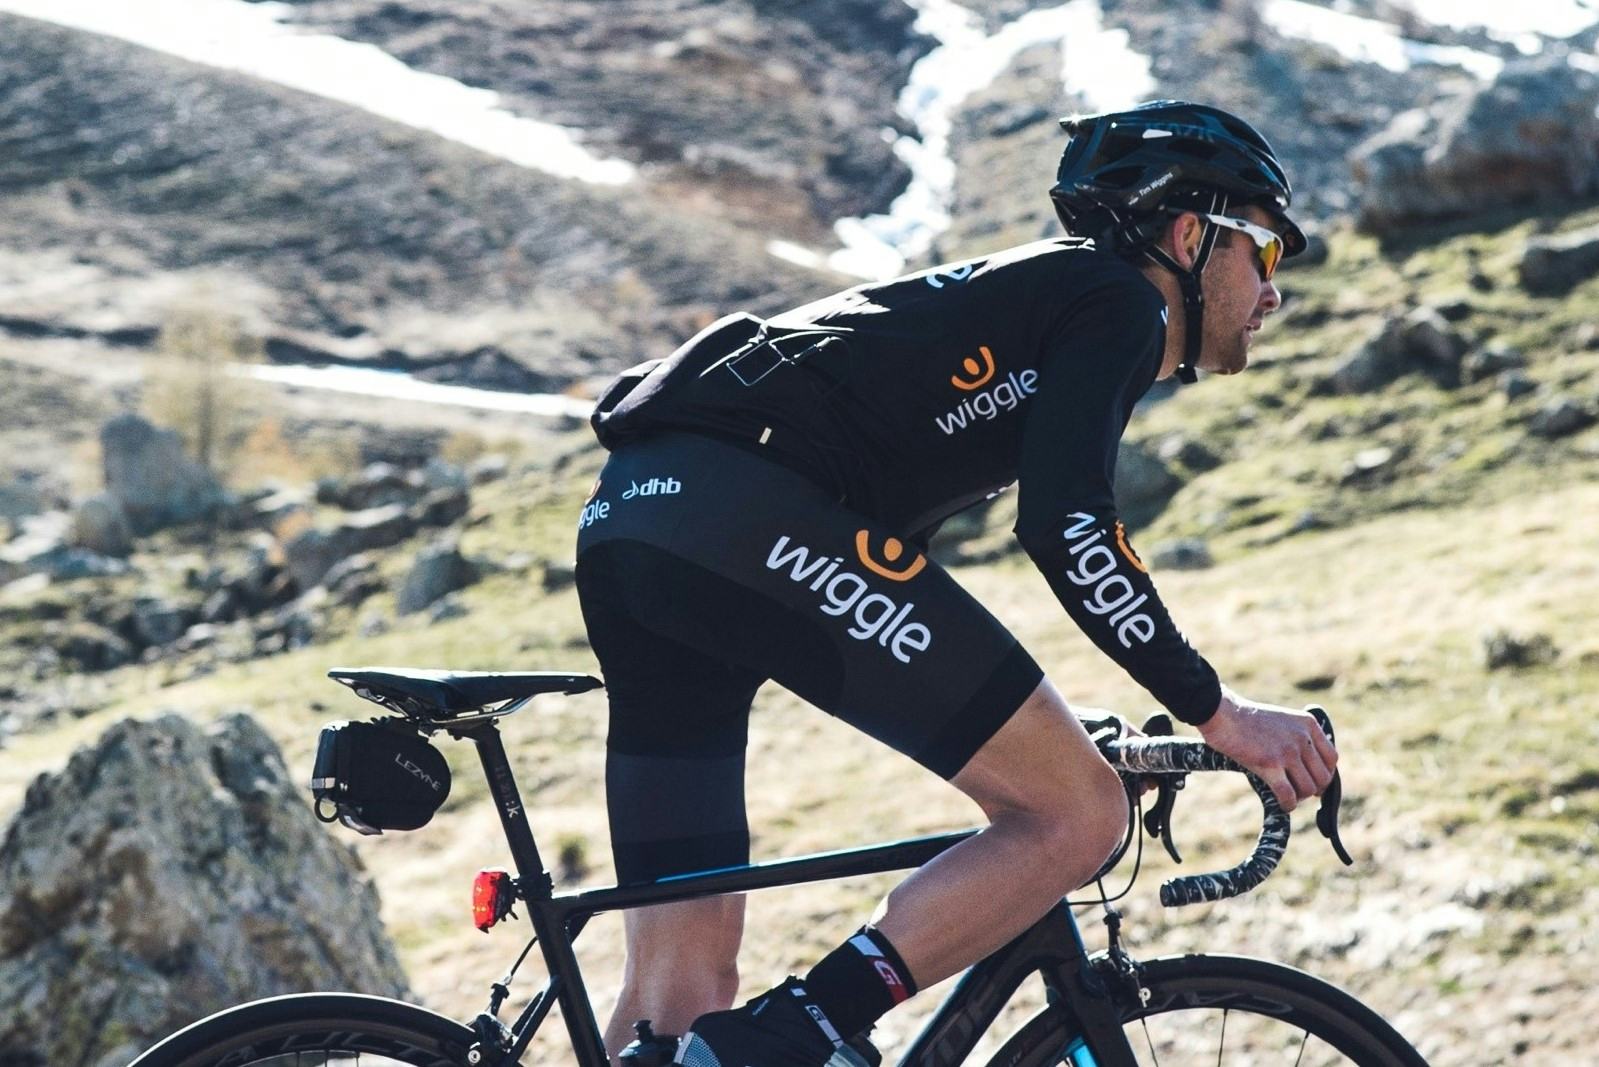 WiggleCRC Group, one of the world's largest online bicycle retailers, will now be taken over by German sports retail giant Signa Sports. - Photo Wiggle